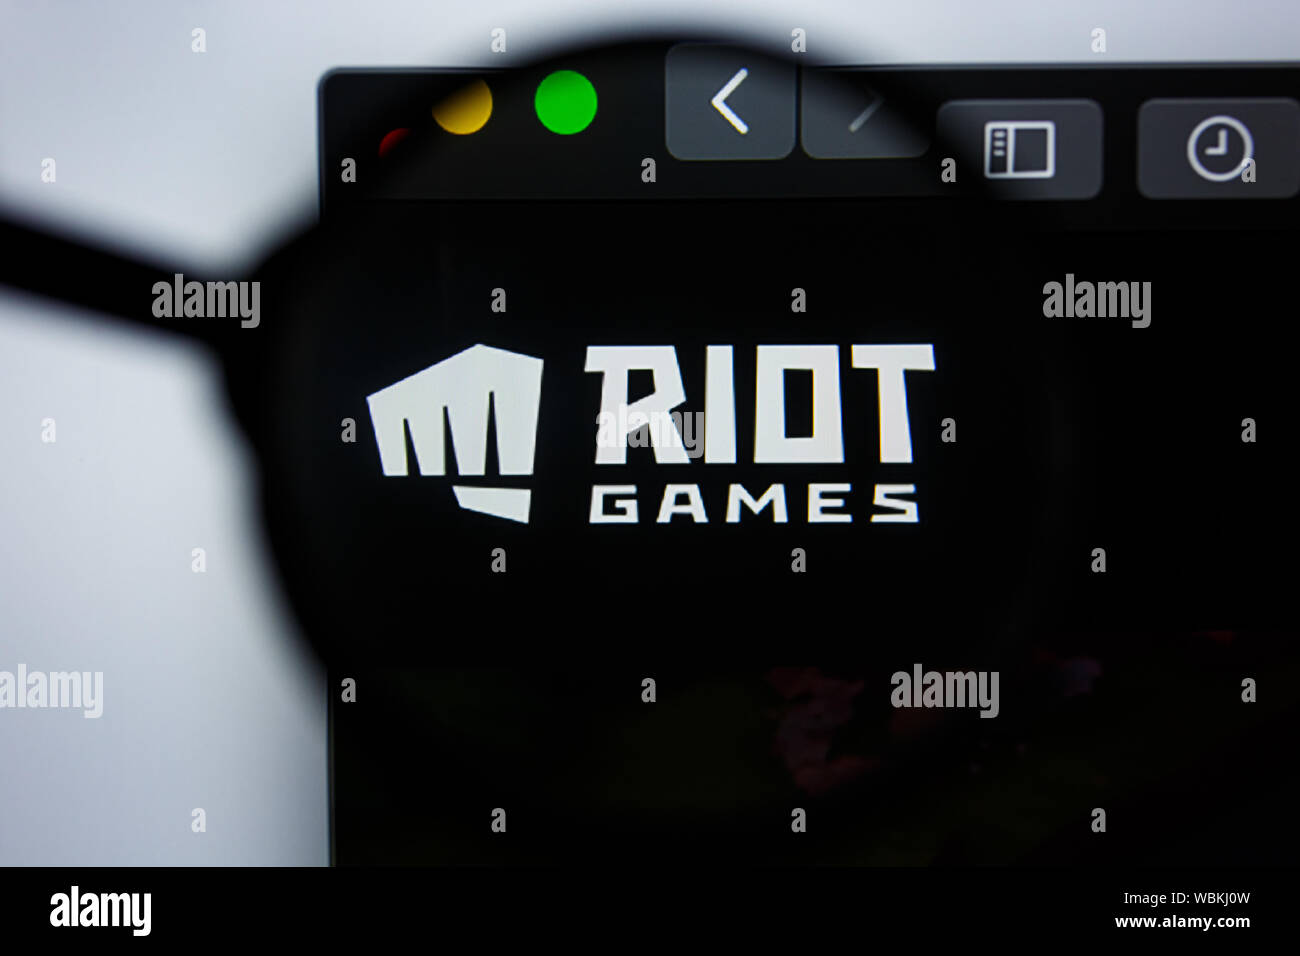 Los Angeles, California, USA - 21 Jule 2019: Illustrative Editorial of  CRAZYGAMES.COM website homepage. CRAZY GAMES logo visible on display screen  Stock Photo - Alamy